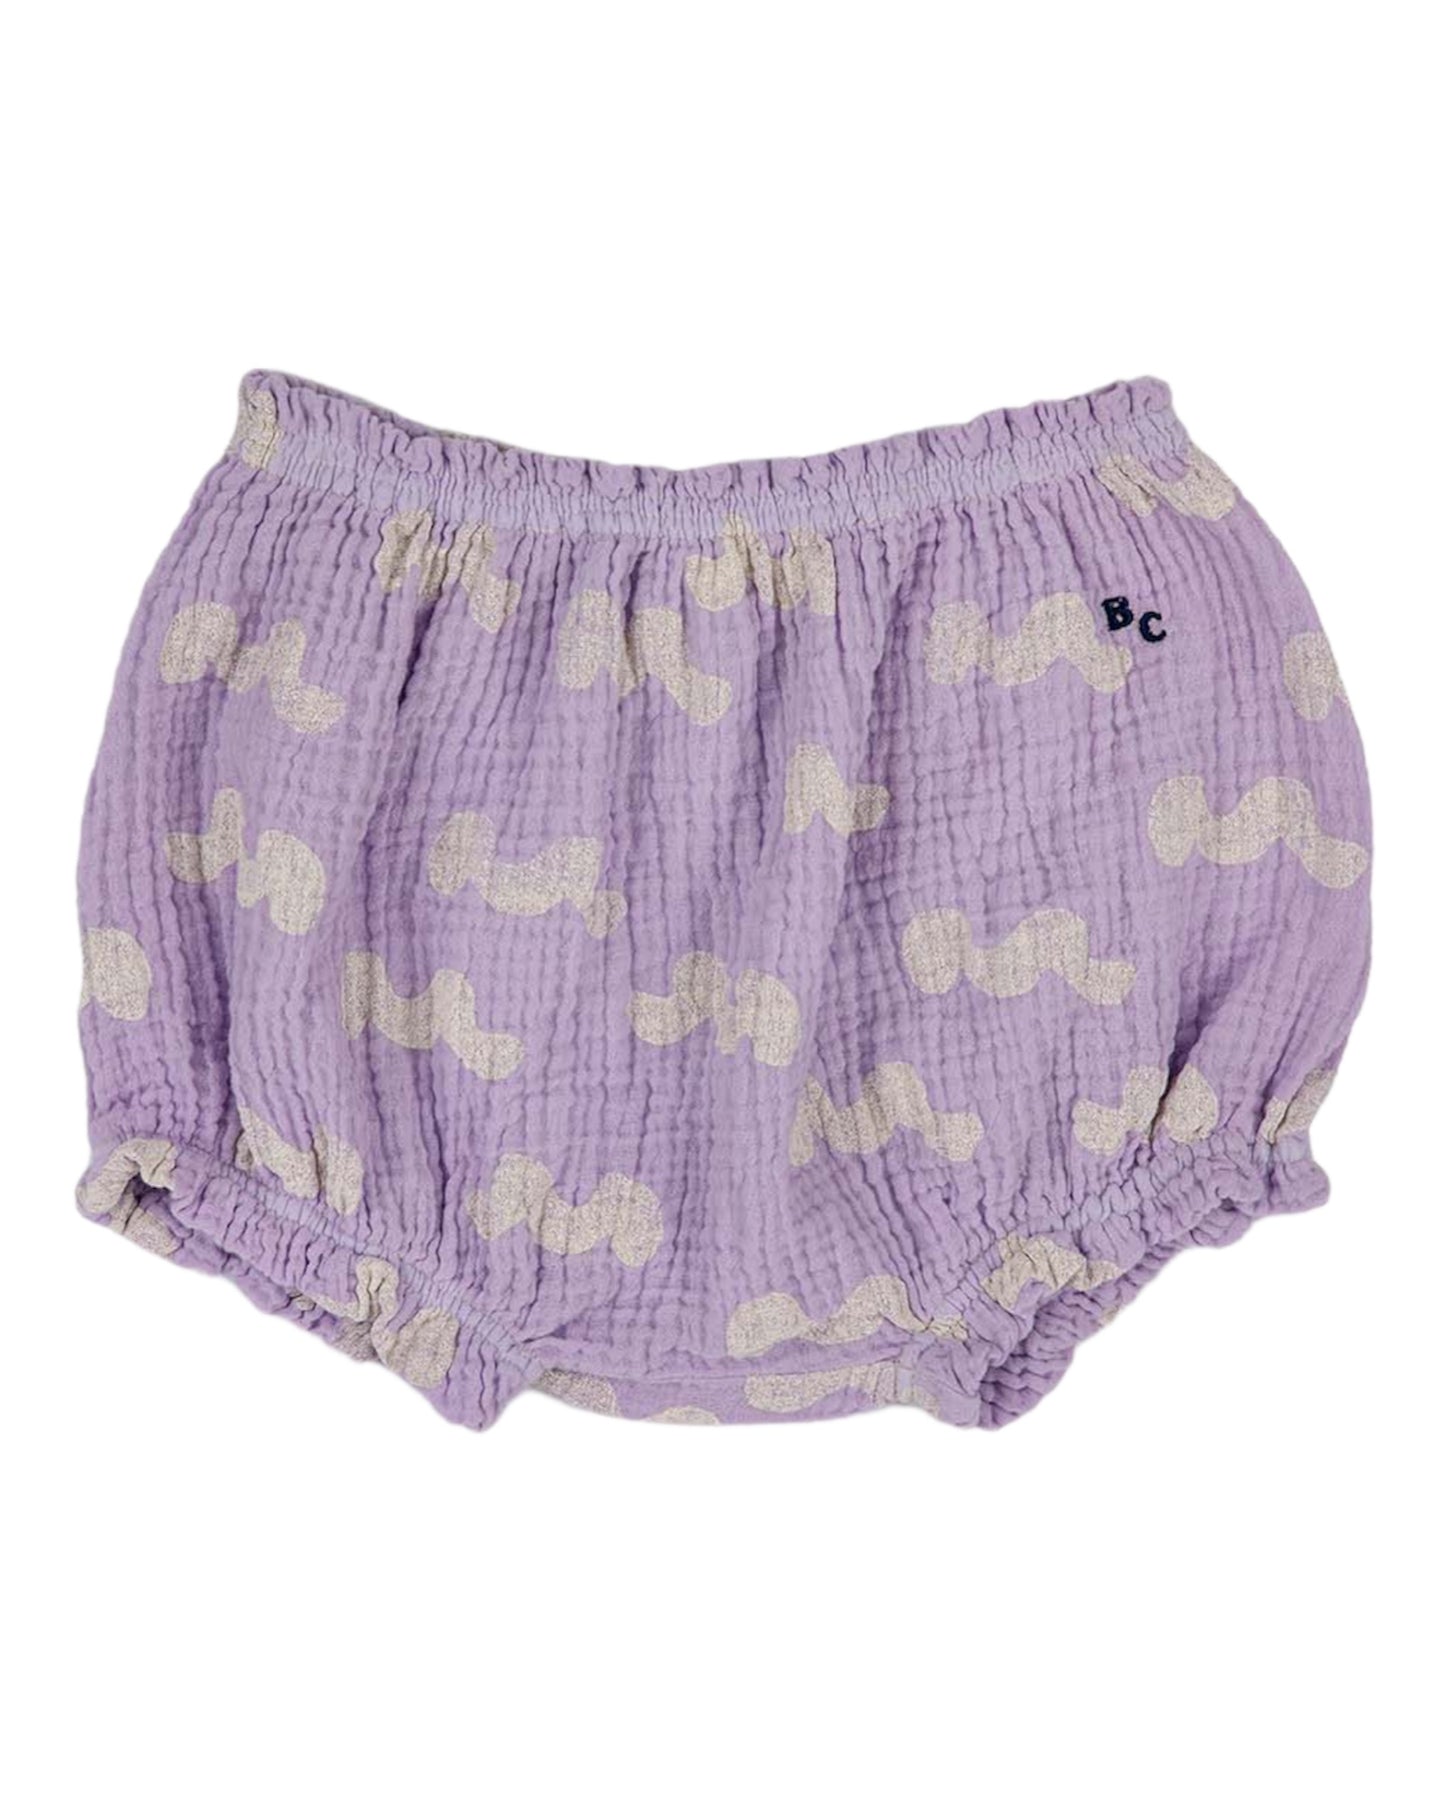 +Bobo Choses+ Waves all over woven ruffle bloomer